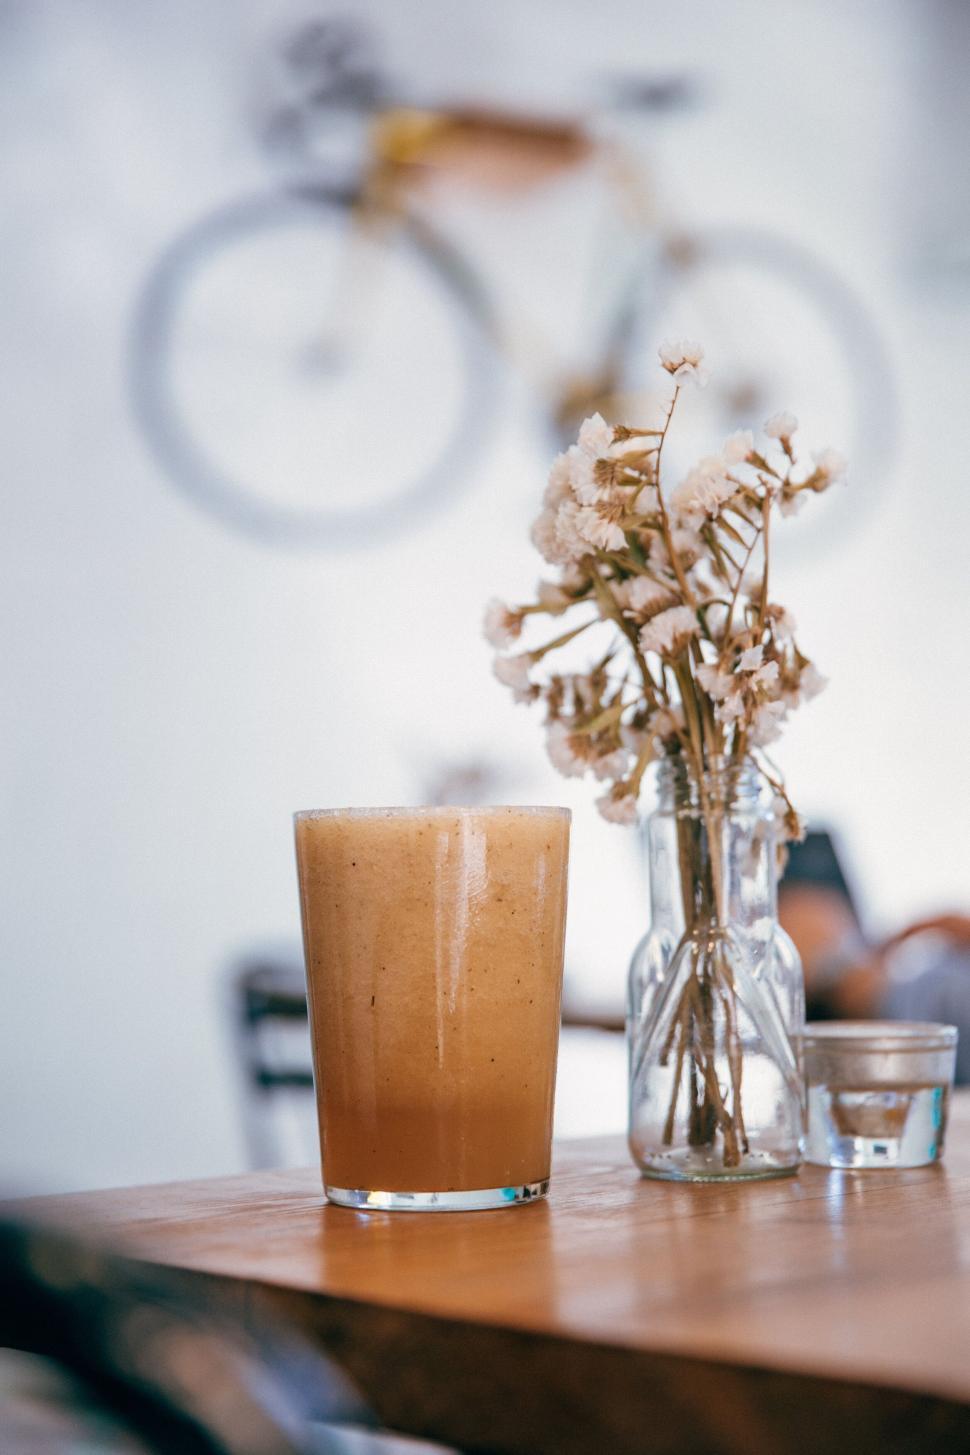 Free Image of Warm ambiance in cafe with smoothie close-up 